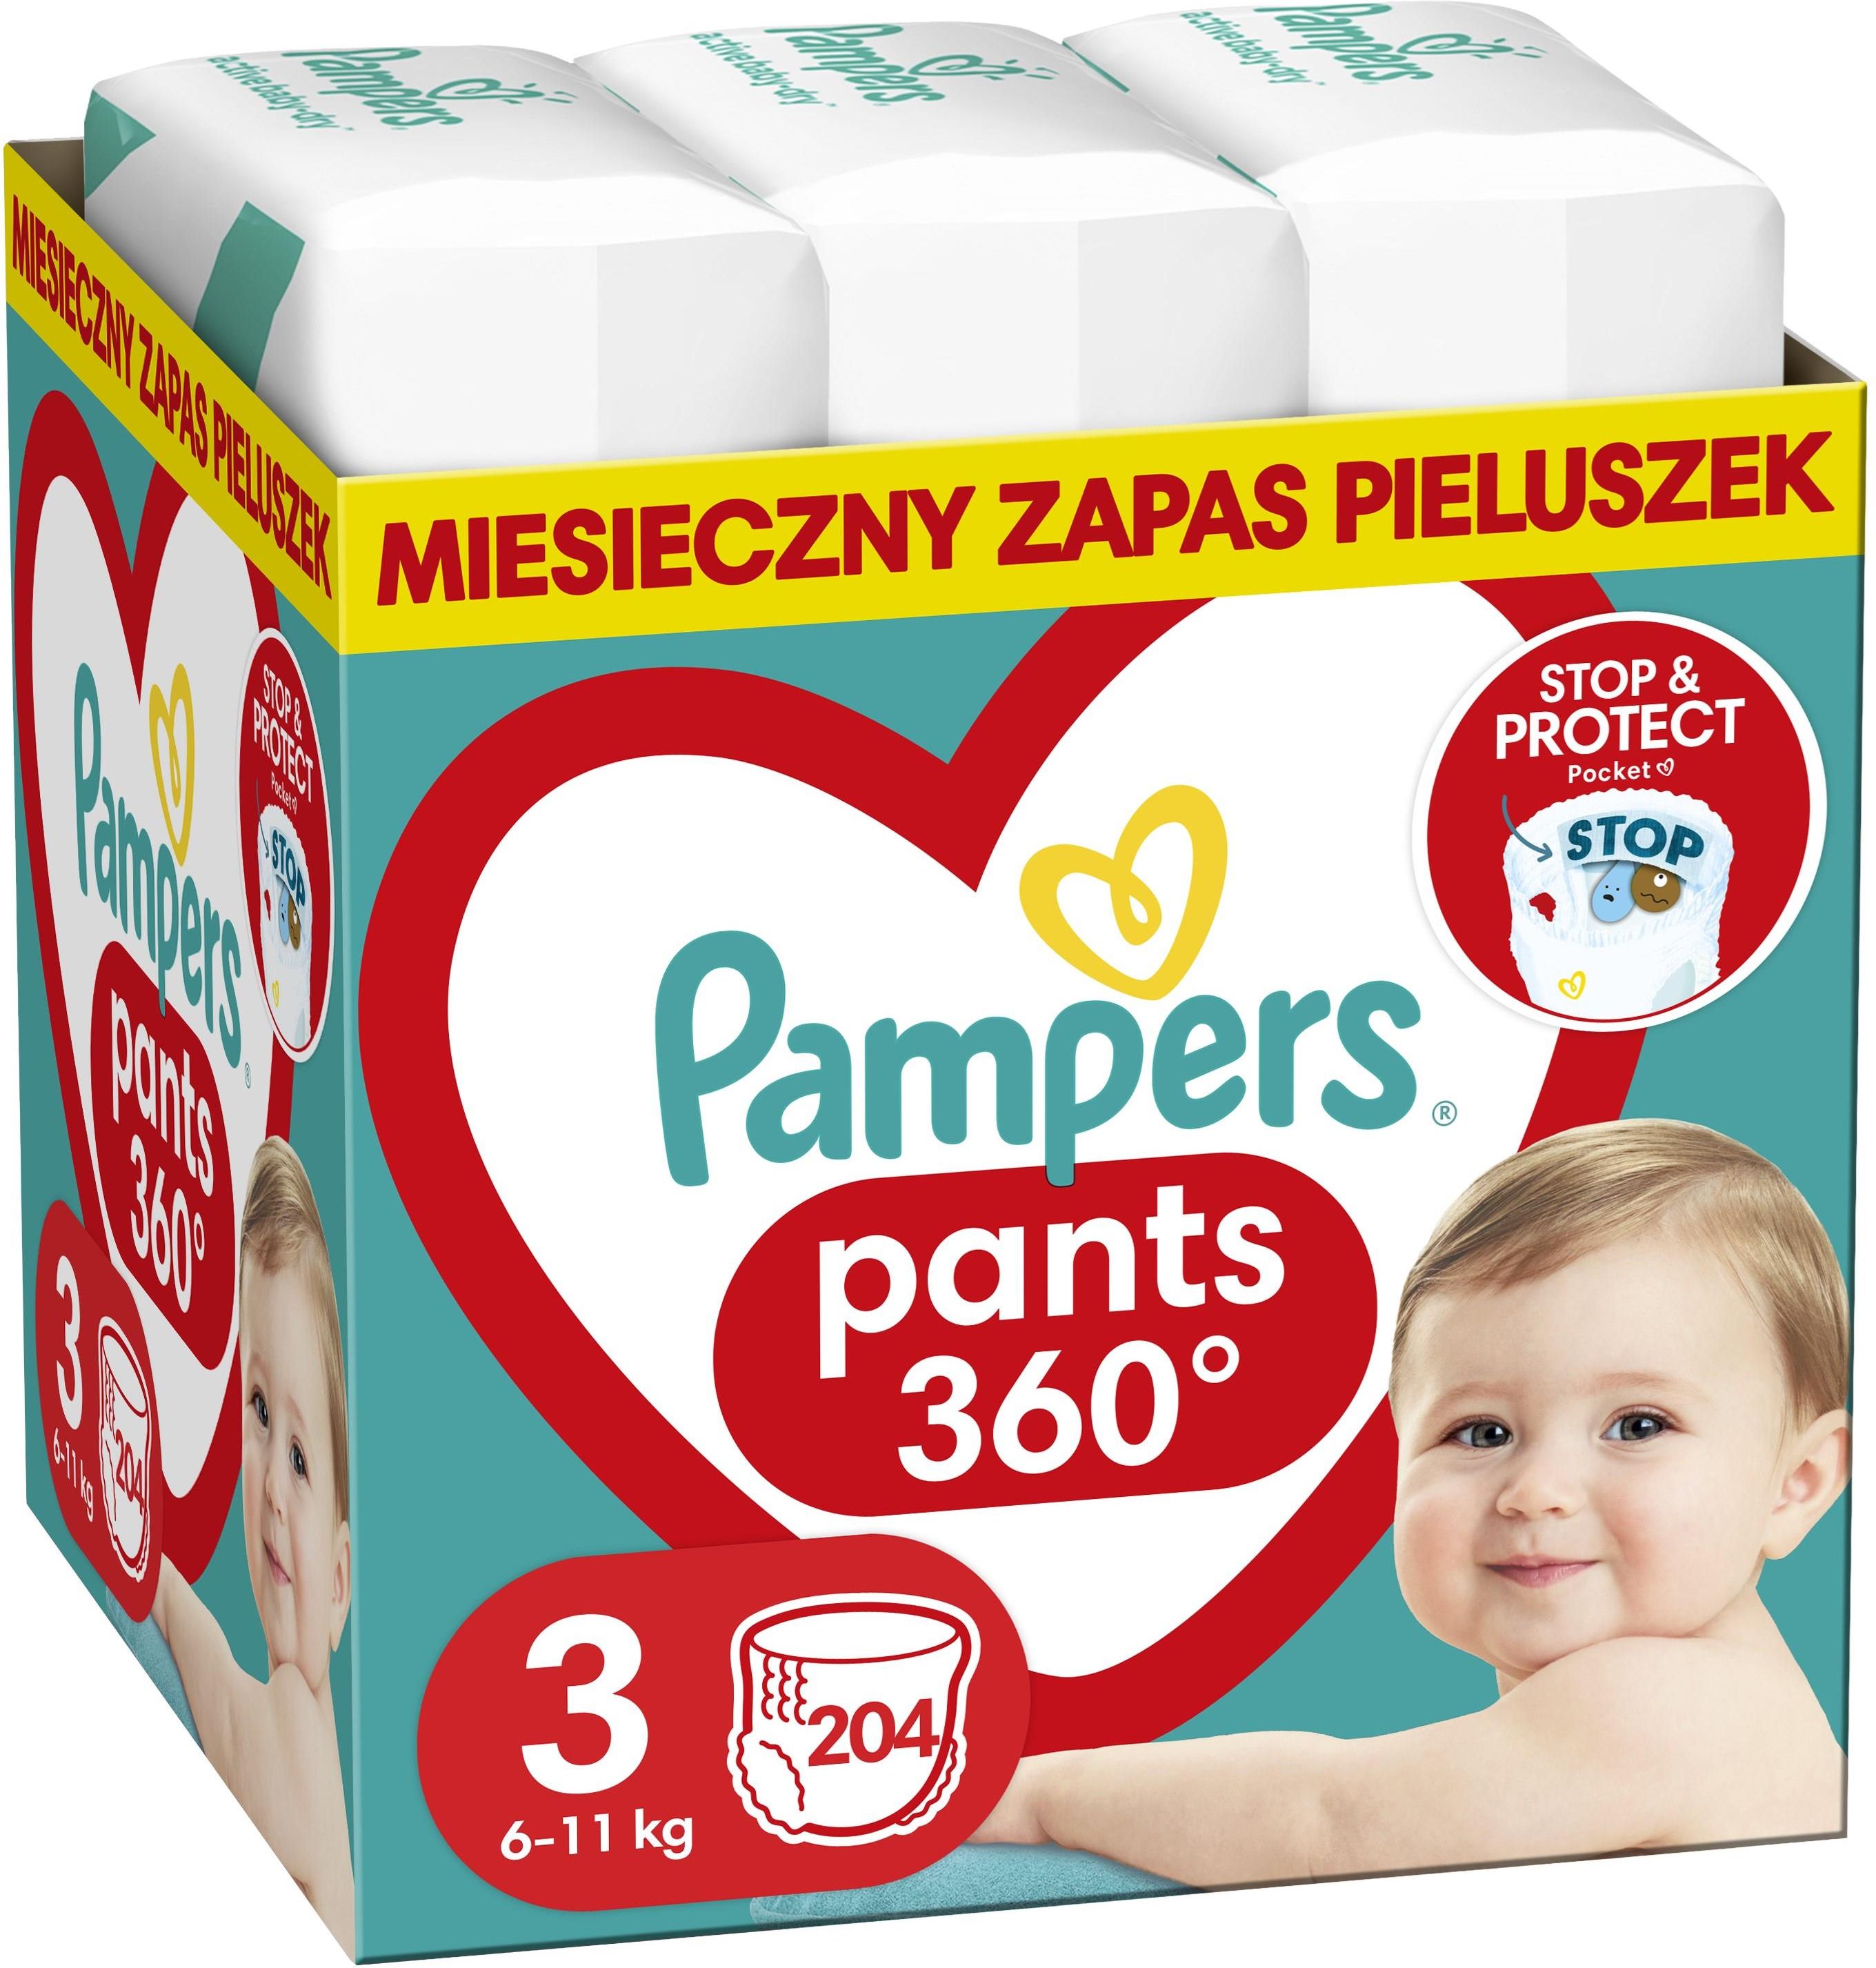 eco pampers rossman